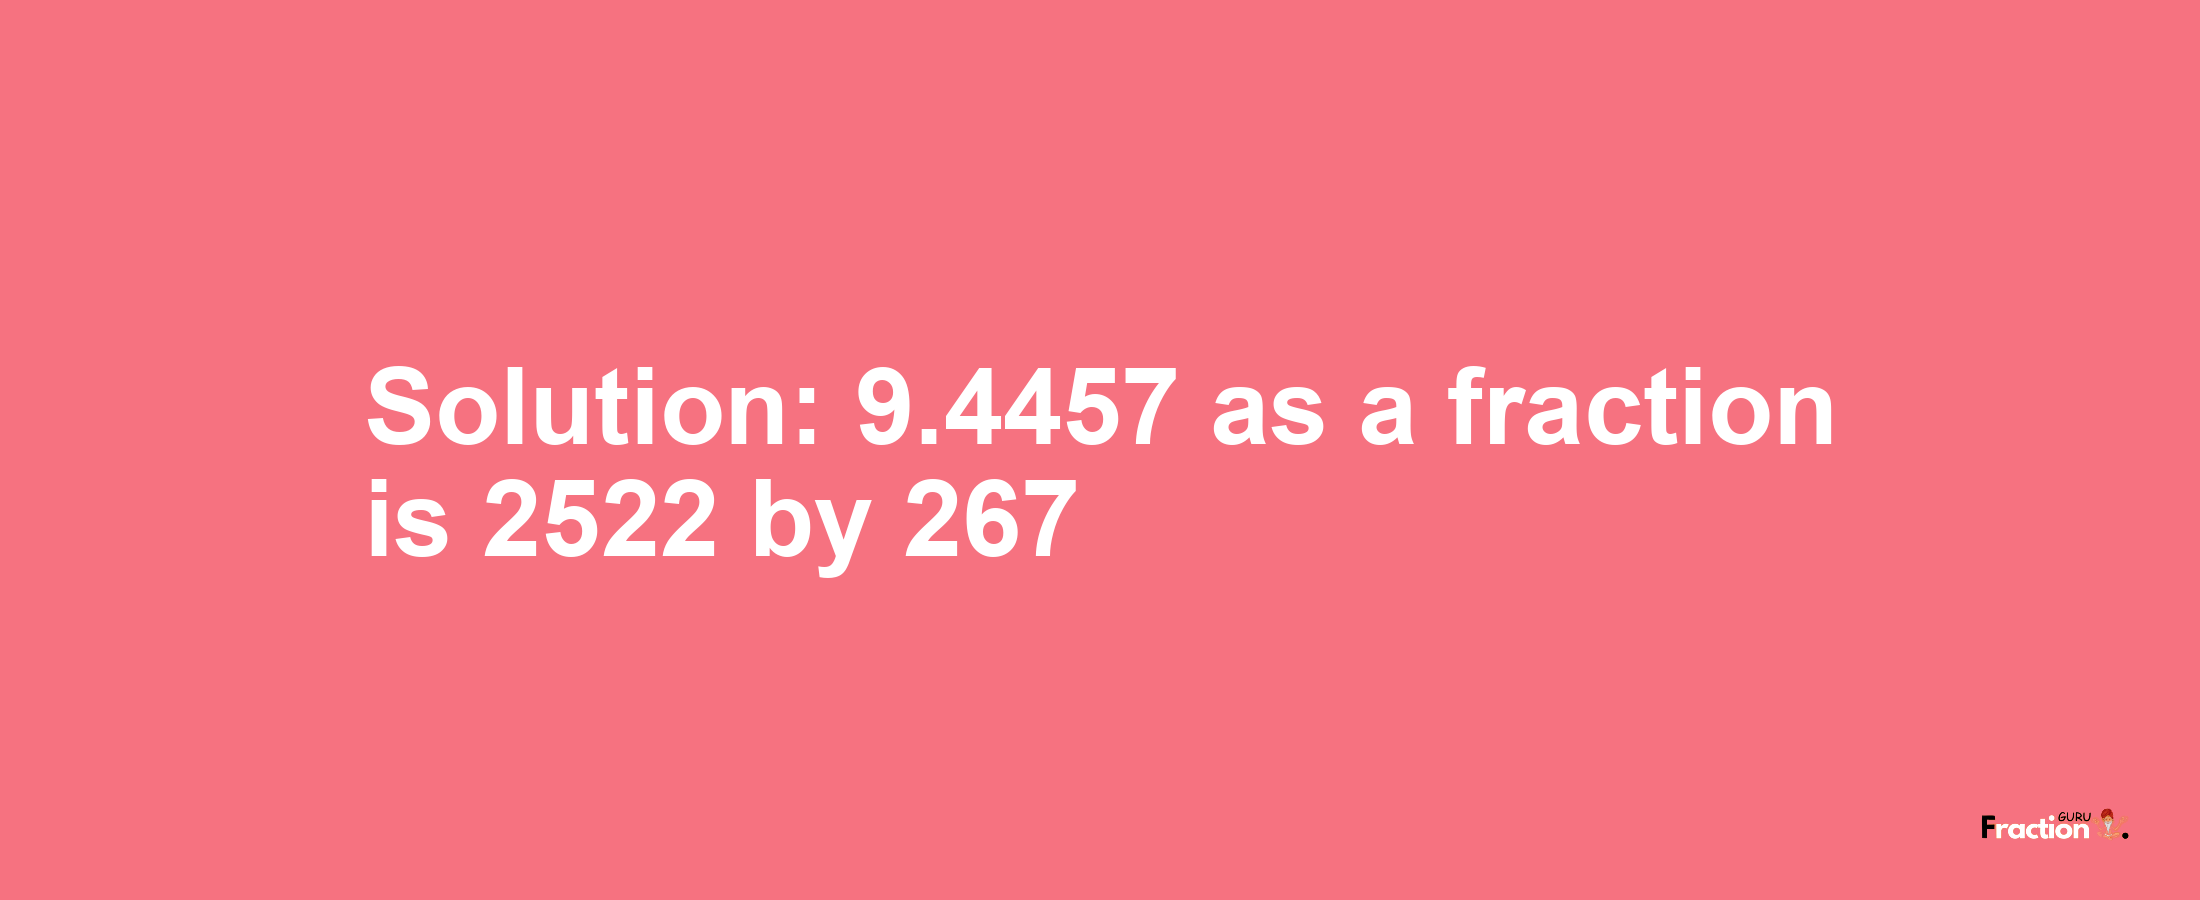 Solution:9.4457 as a fraction is 2522/267